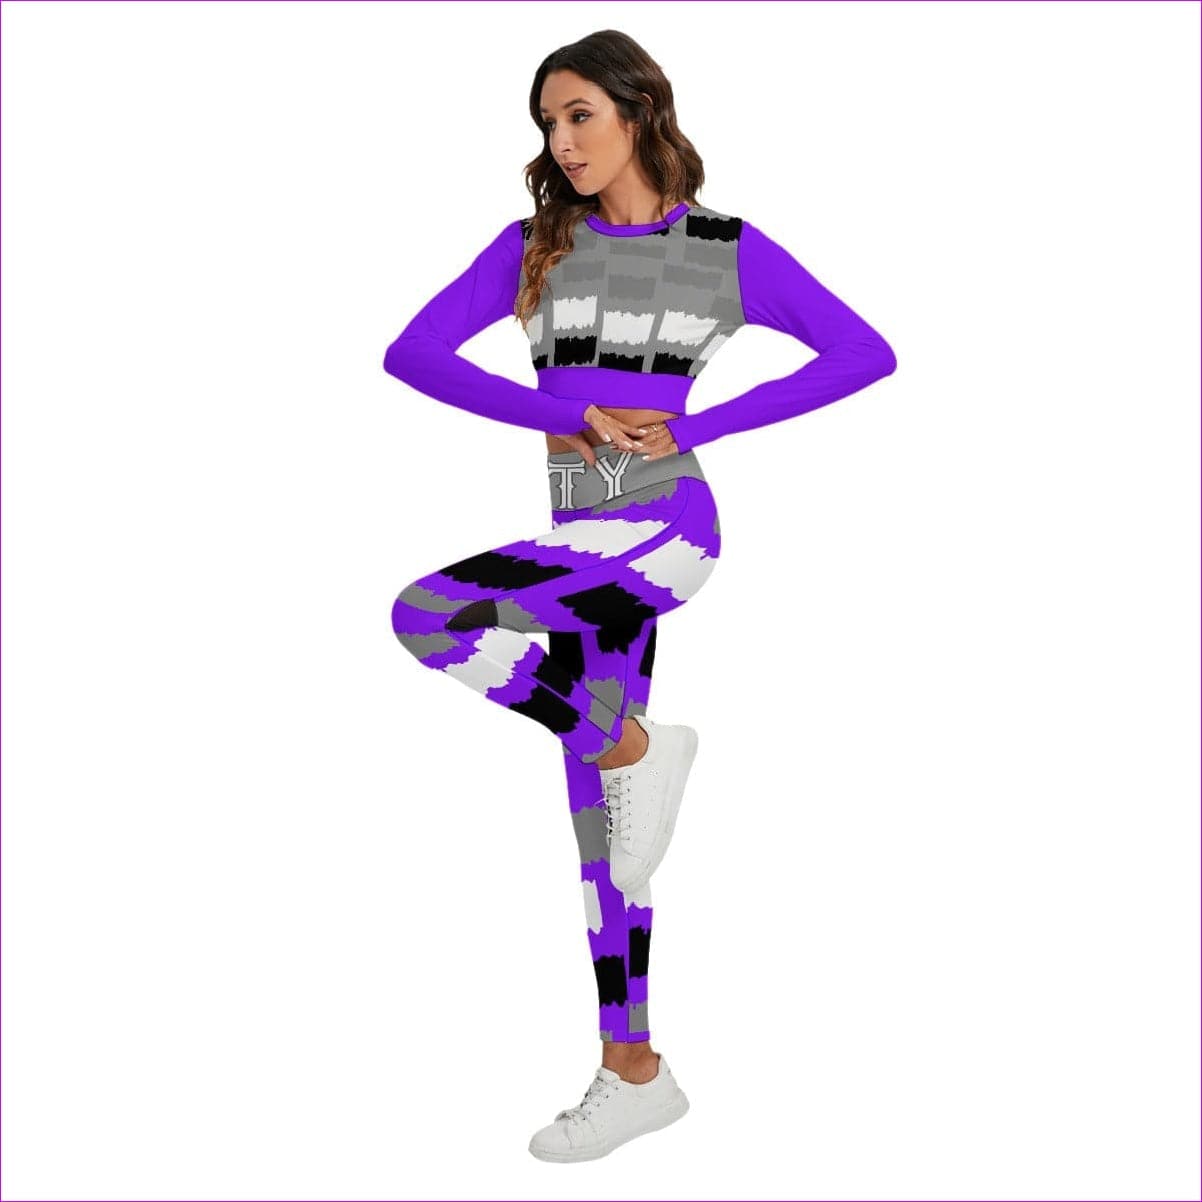 Deity Womens Sport Set With Backless Top And Leggings